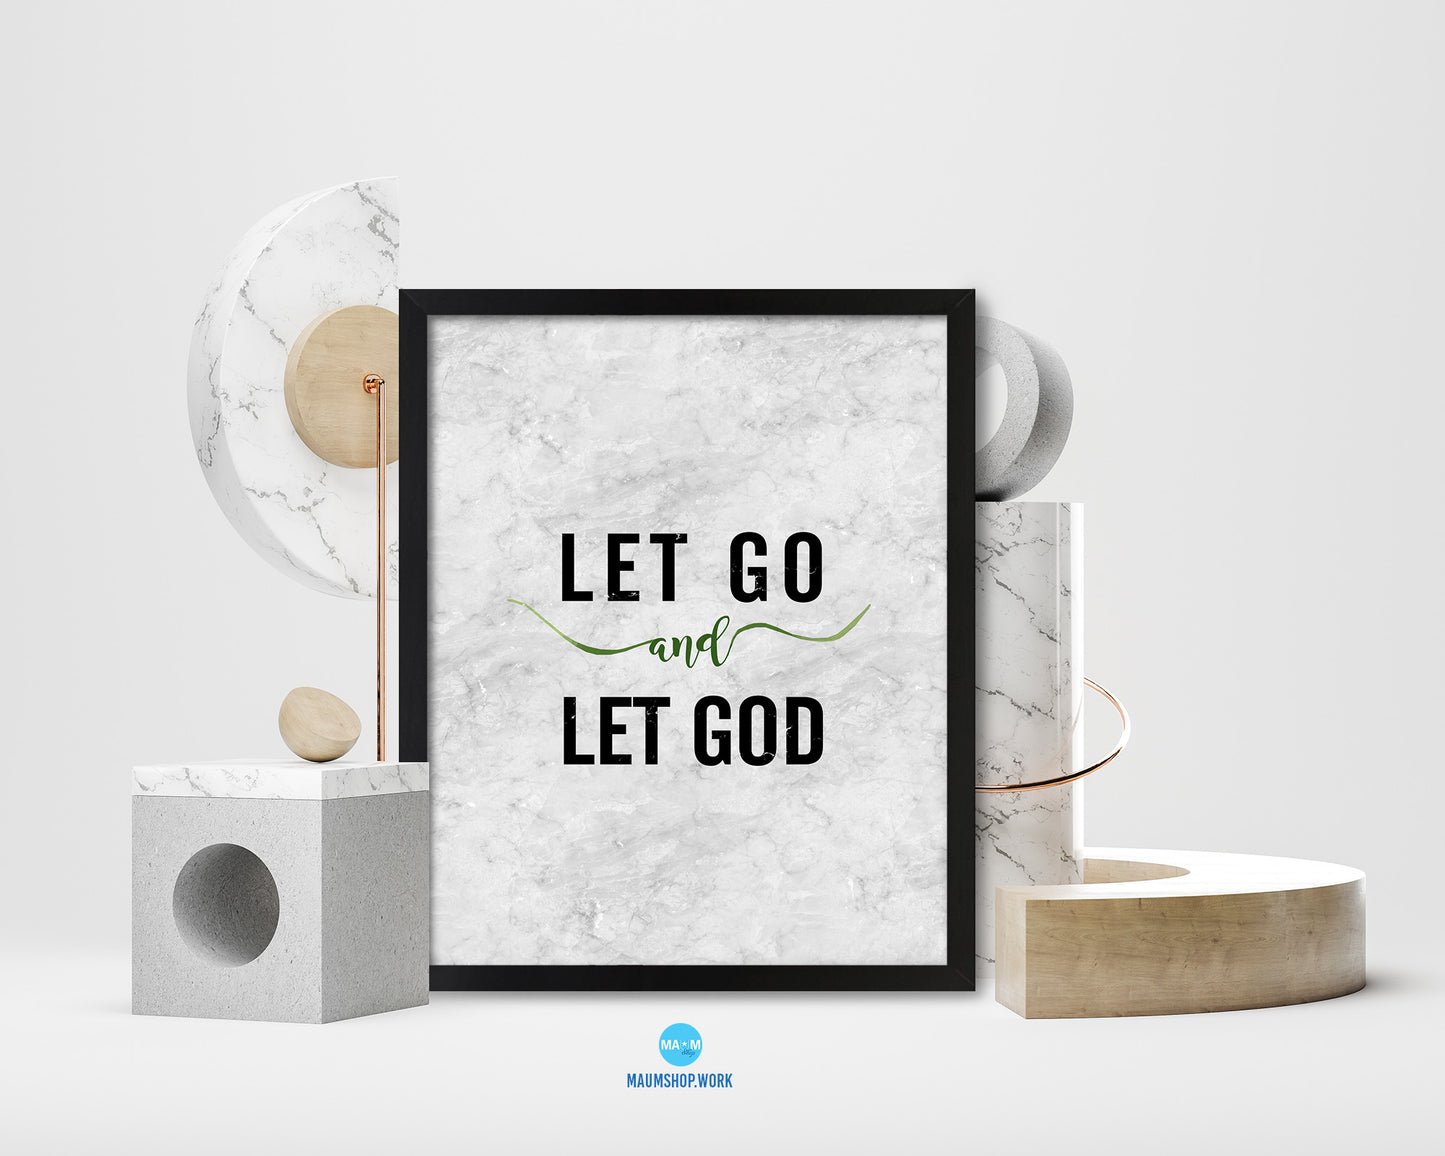 Let go and let God Quote Framed Print Wall Art Decor Gifts